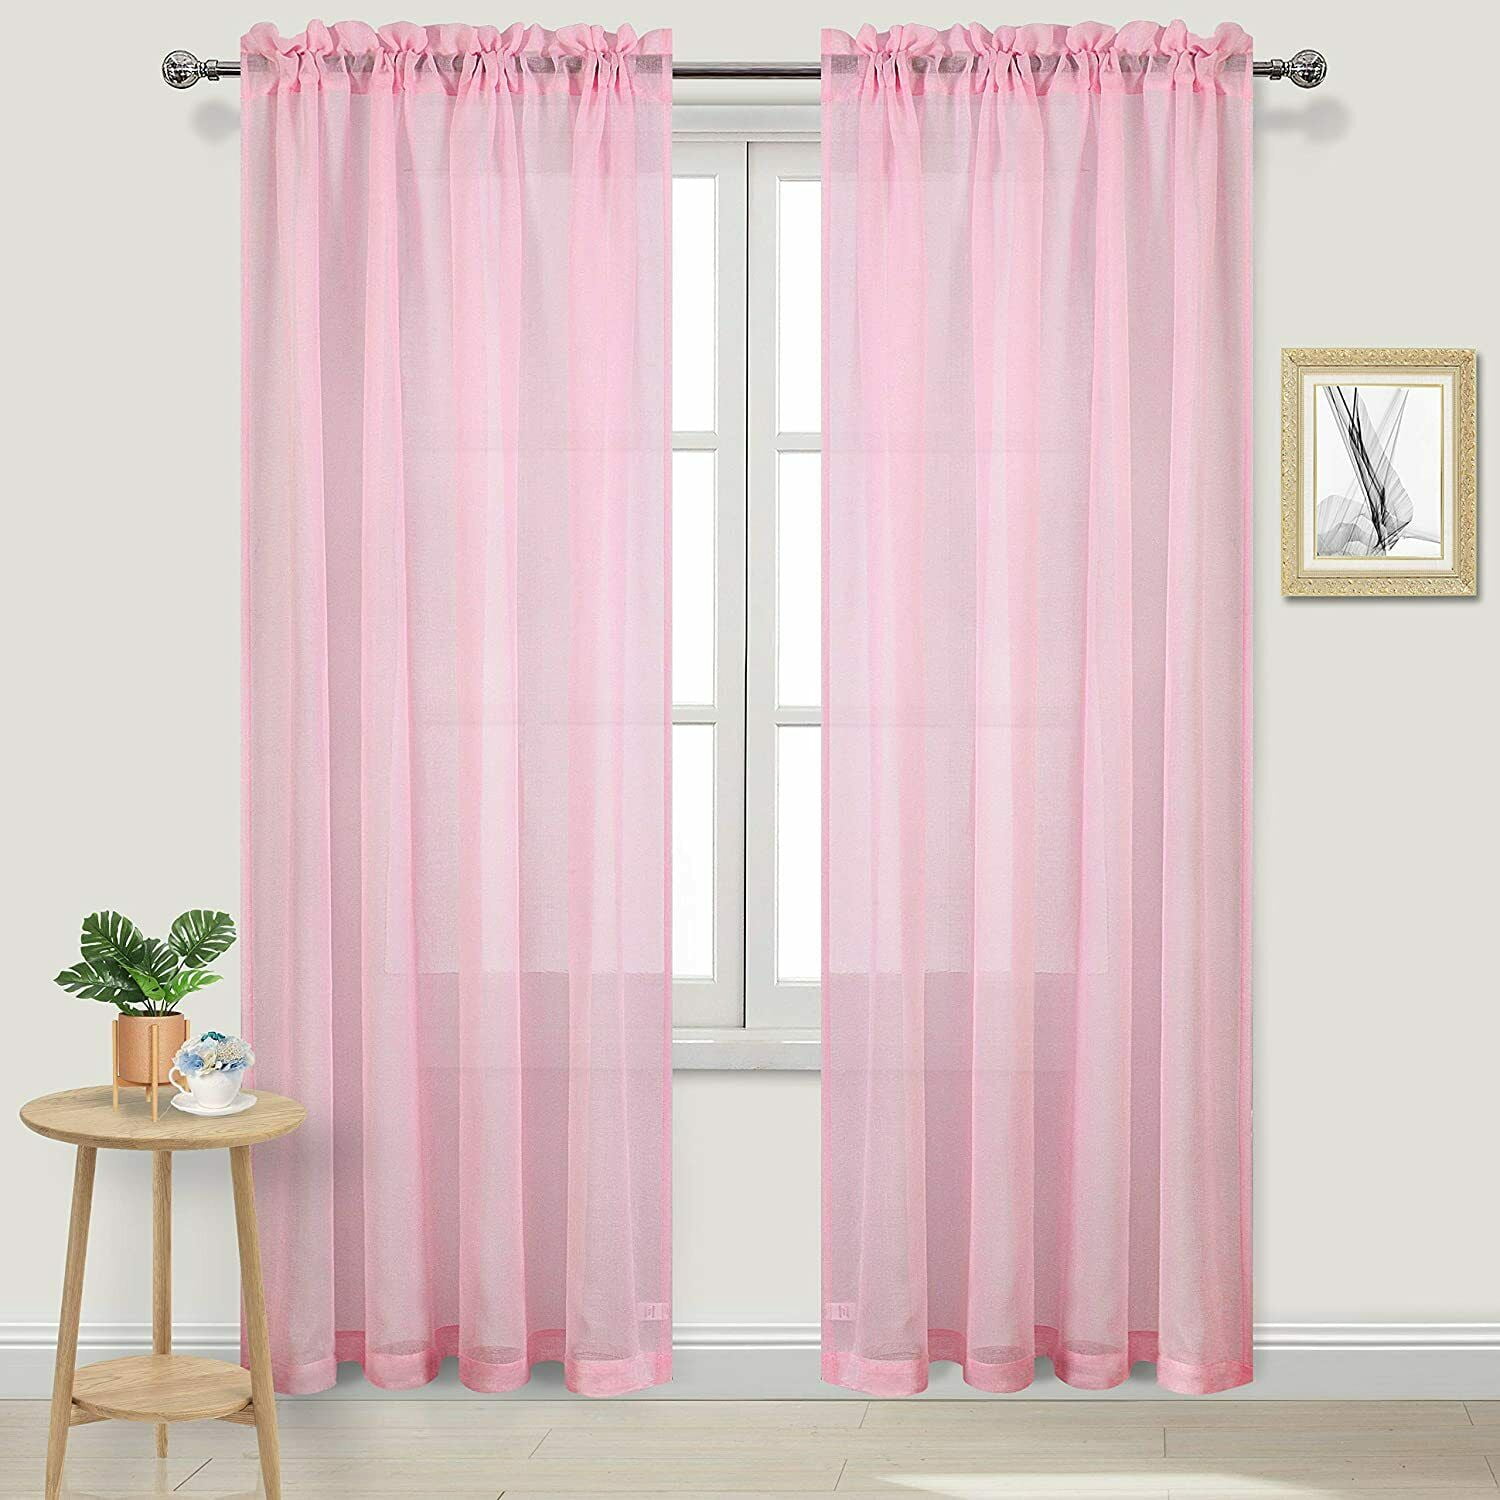 Lovely elegant 2pc MR2 hot pink curtain semi sheer voile with rod pocket  solid color light filtering window tretament drape for any room inside  outside 54 wide X 84 Long 